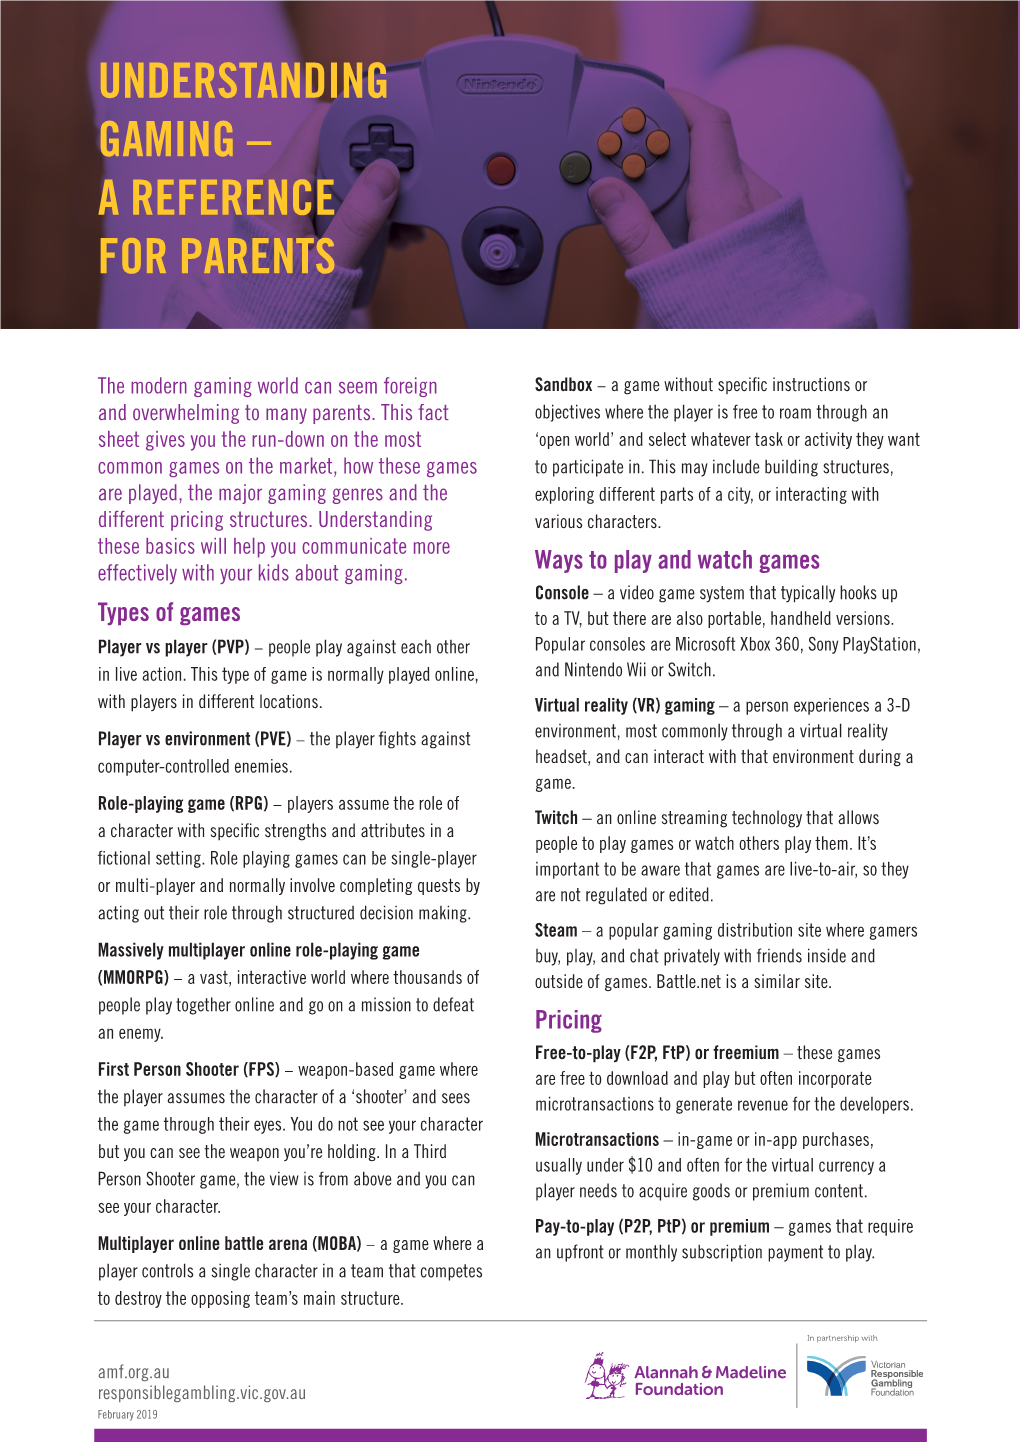 Understanding Gaming – a Reference for Parents